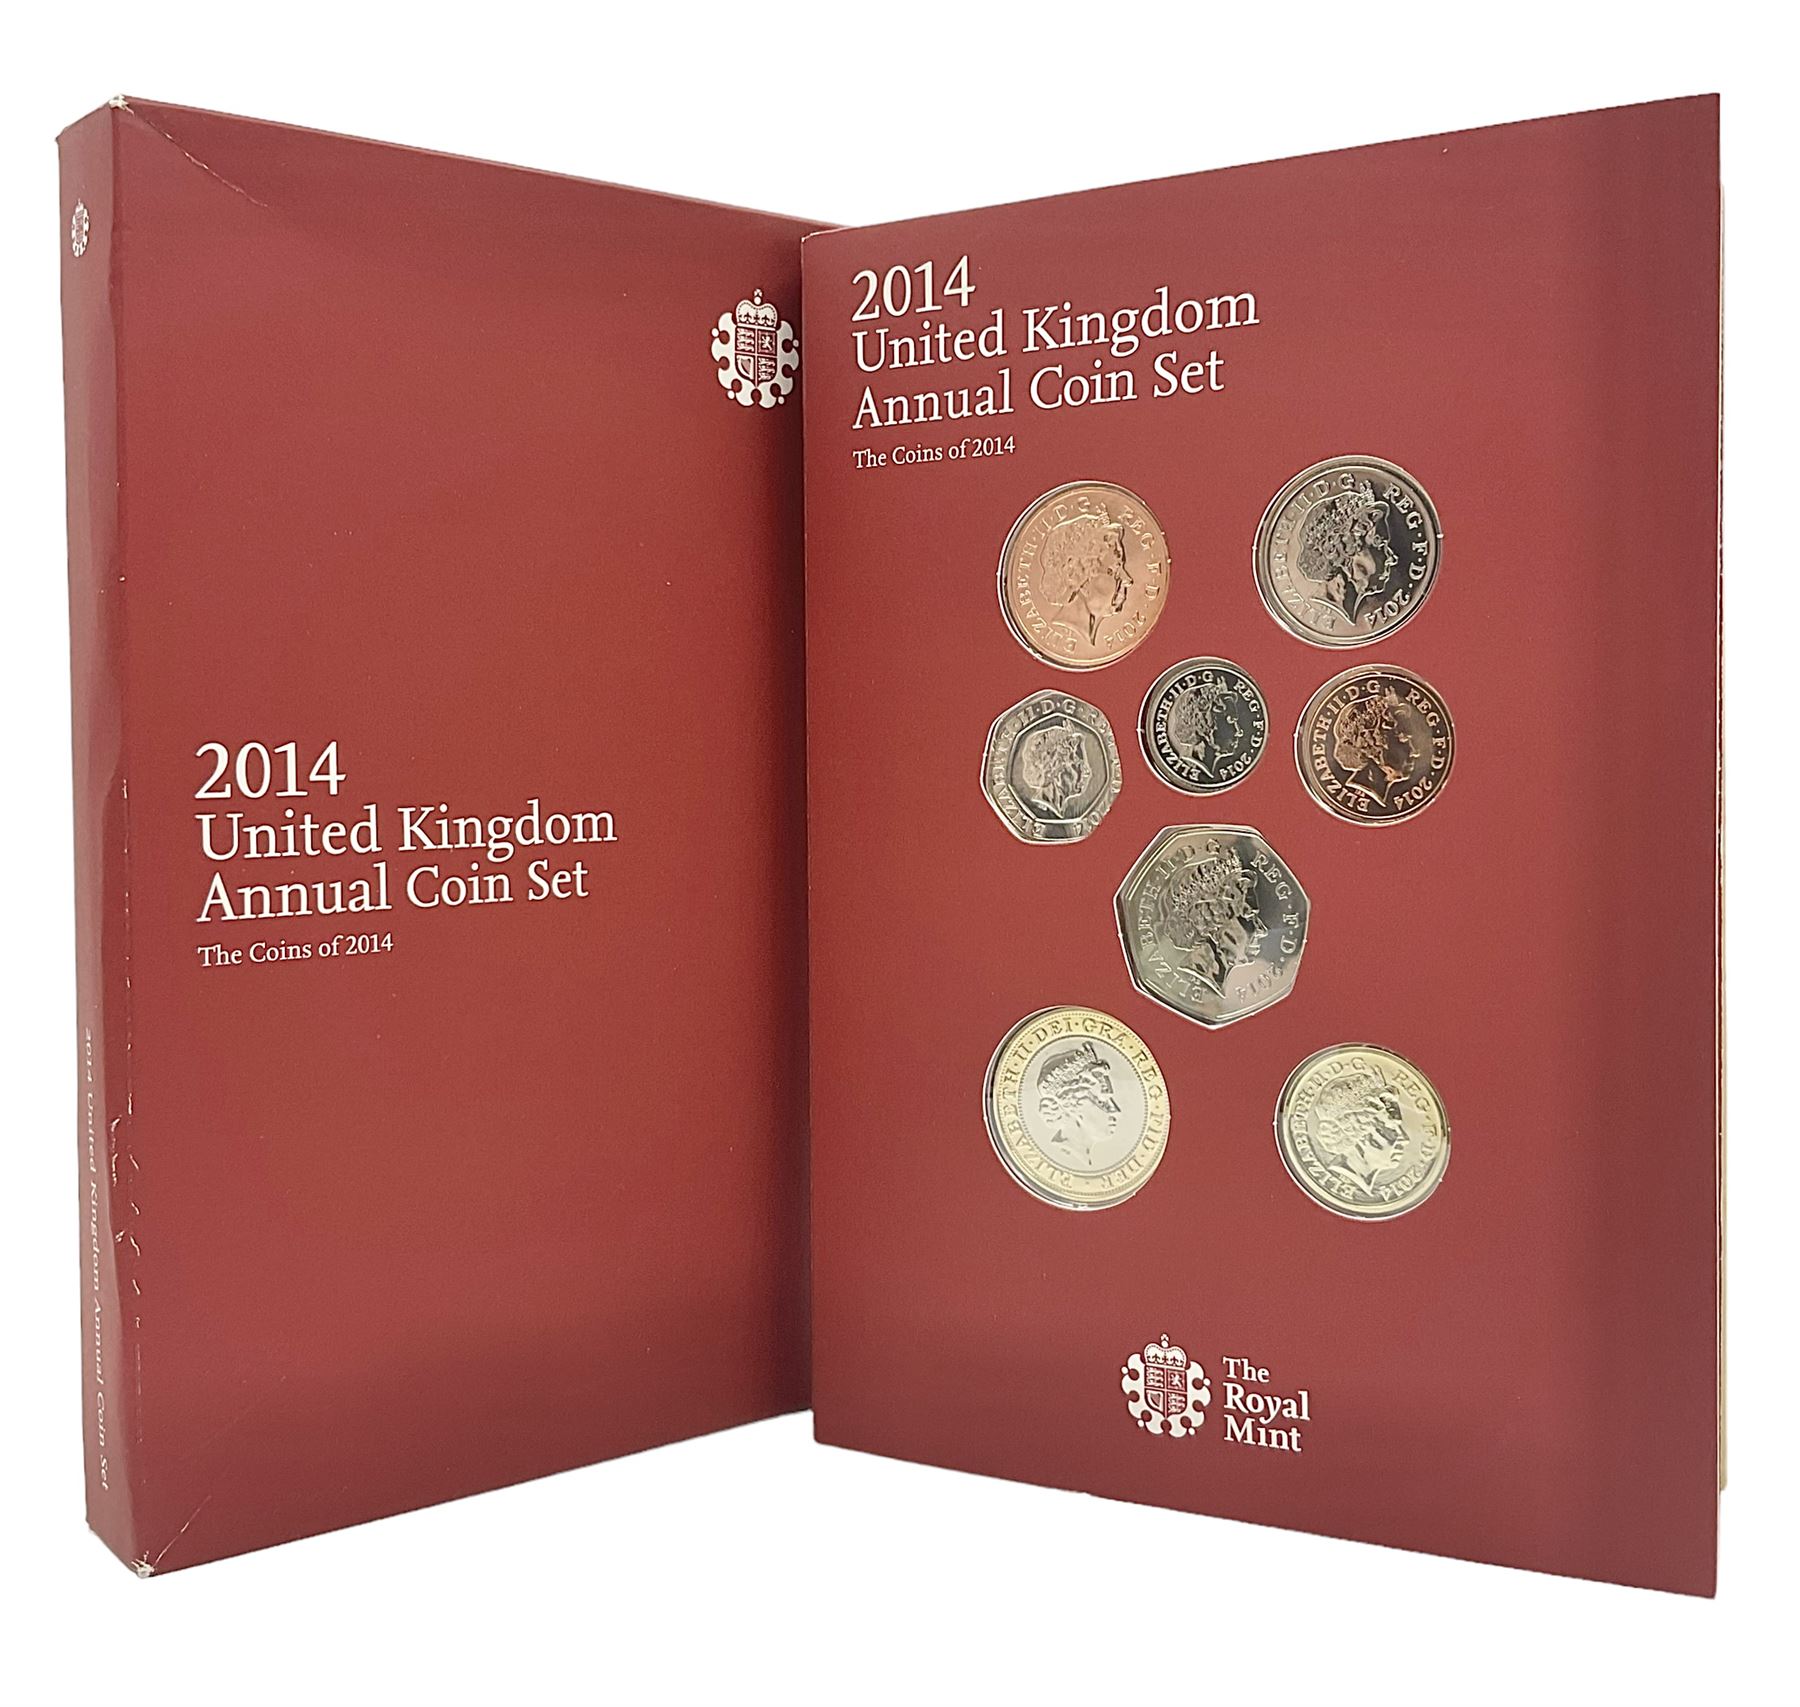 The Royal Mint United Kingdom 2014 annual coin set